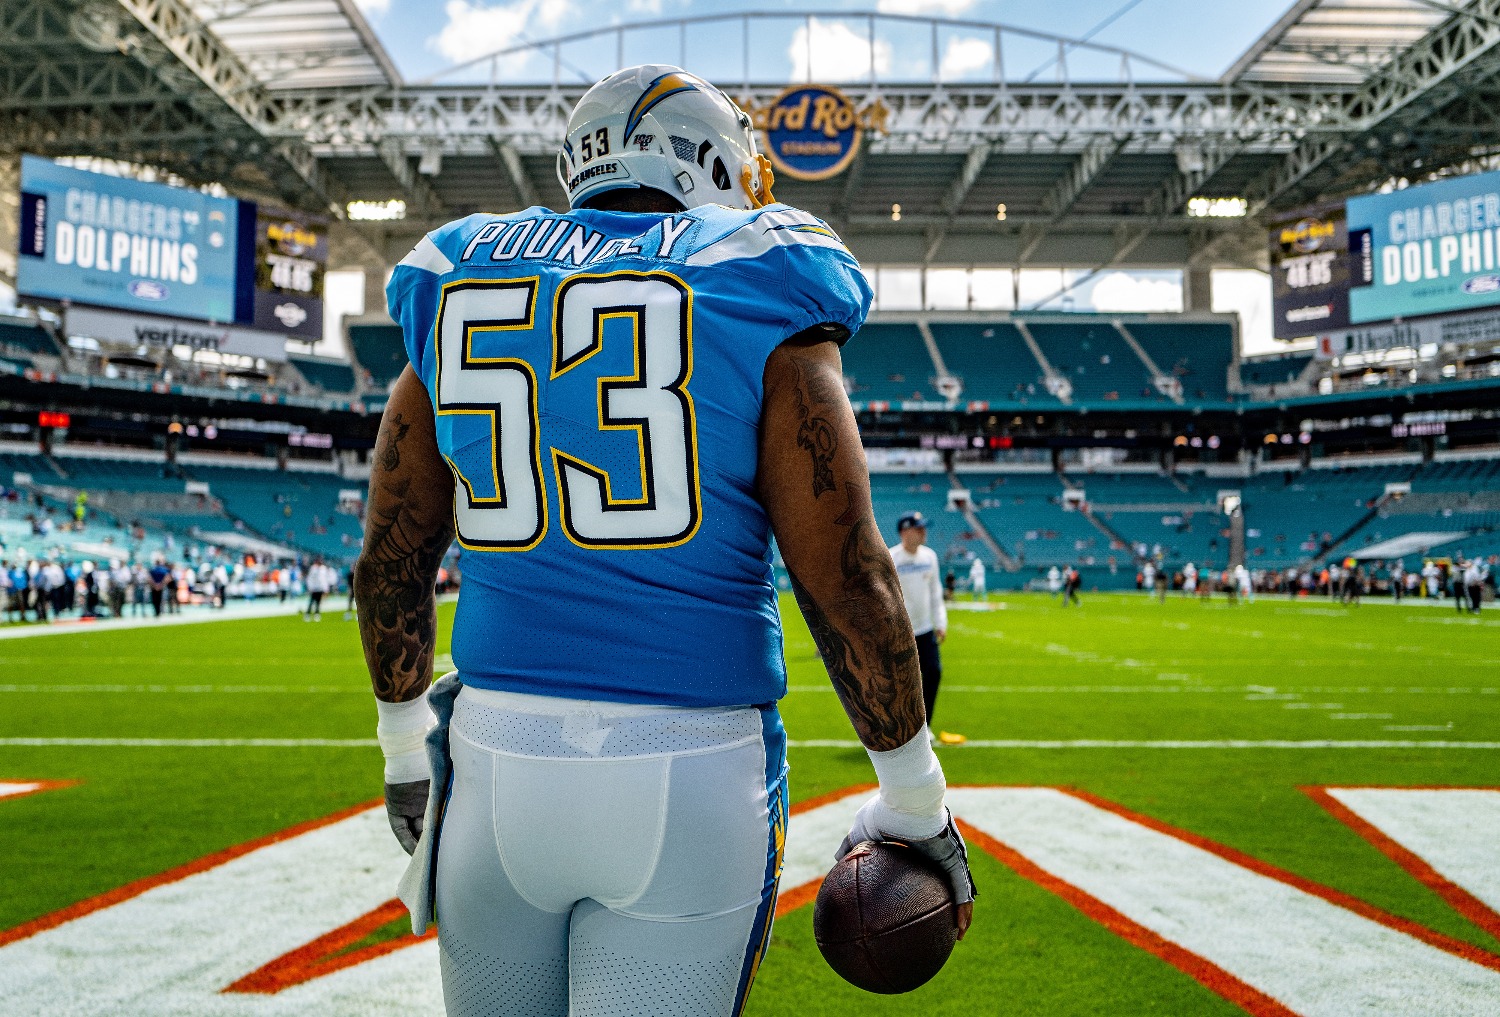 After already losing Derwin James for the year, the LA Chargers will have to replace Mike Pouncey after the veteran center suffered a hip injury that will end his season.